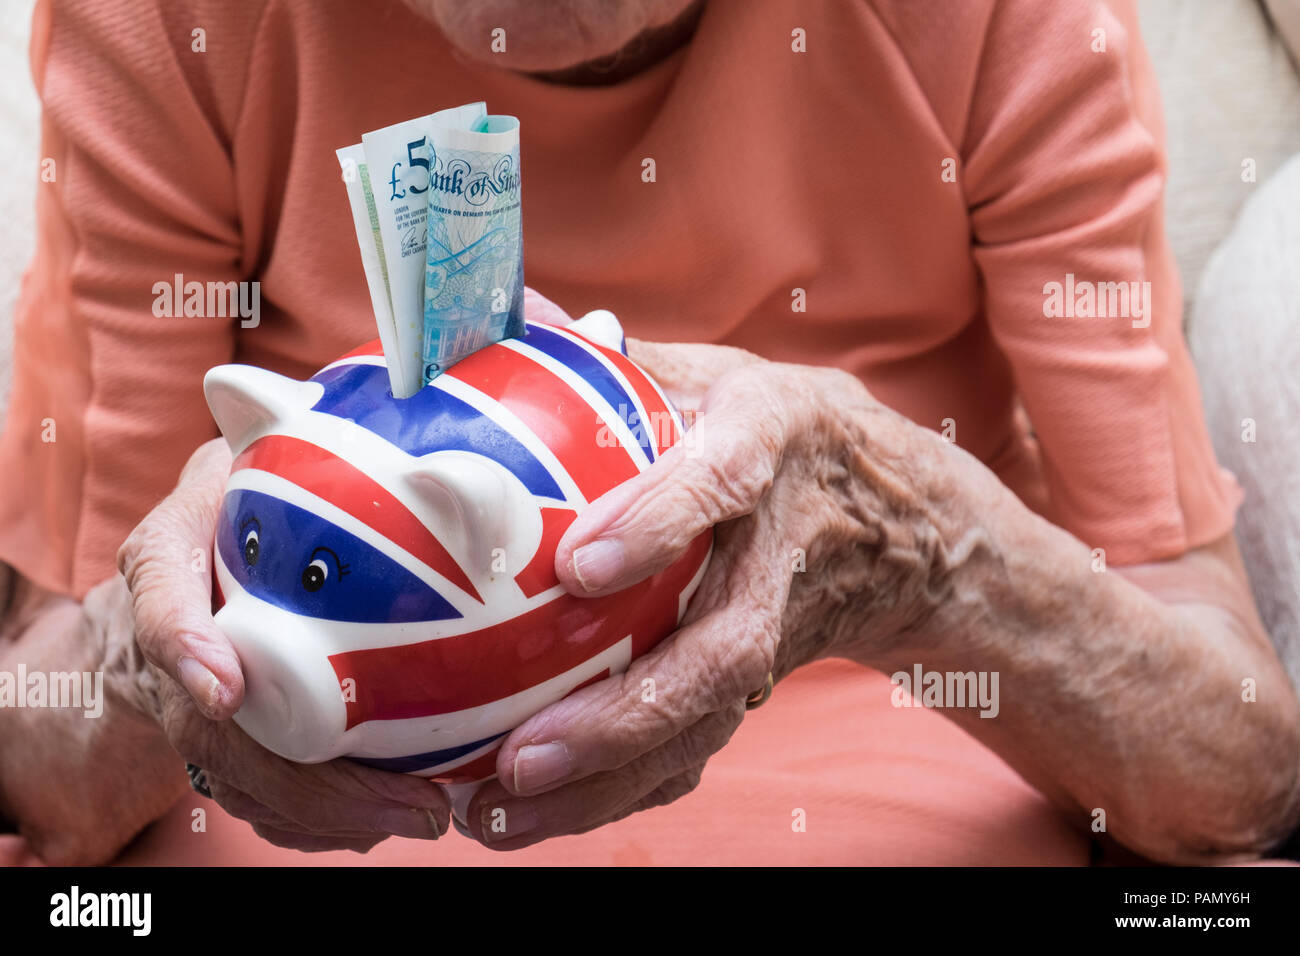 Pension savings, five pound note in piggy bank held by elderly hands Stock Photo